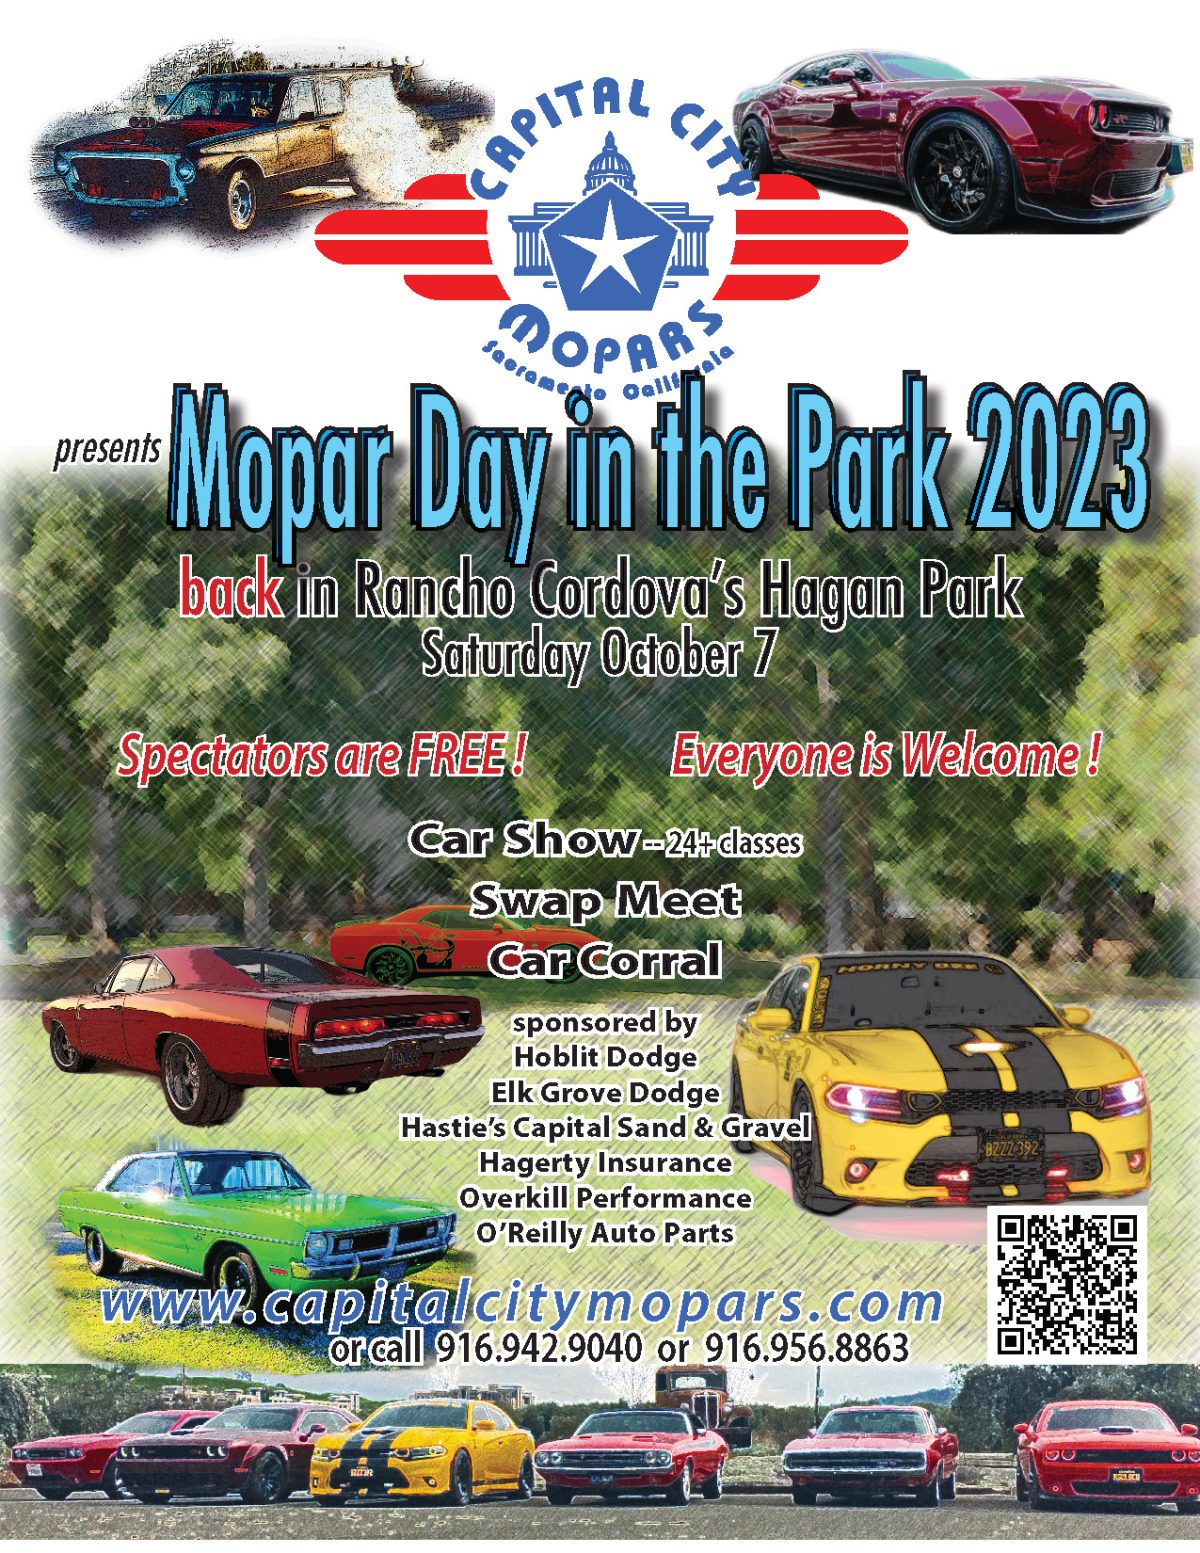 Mopar Day in the Park